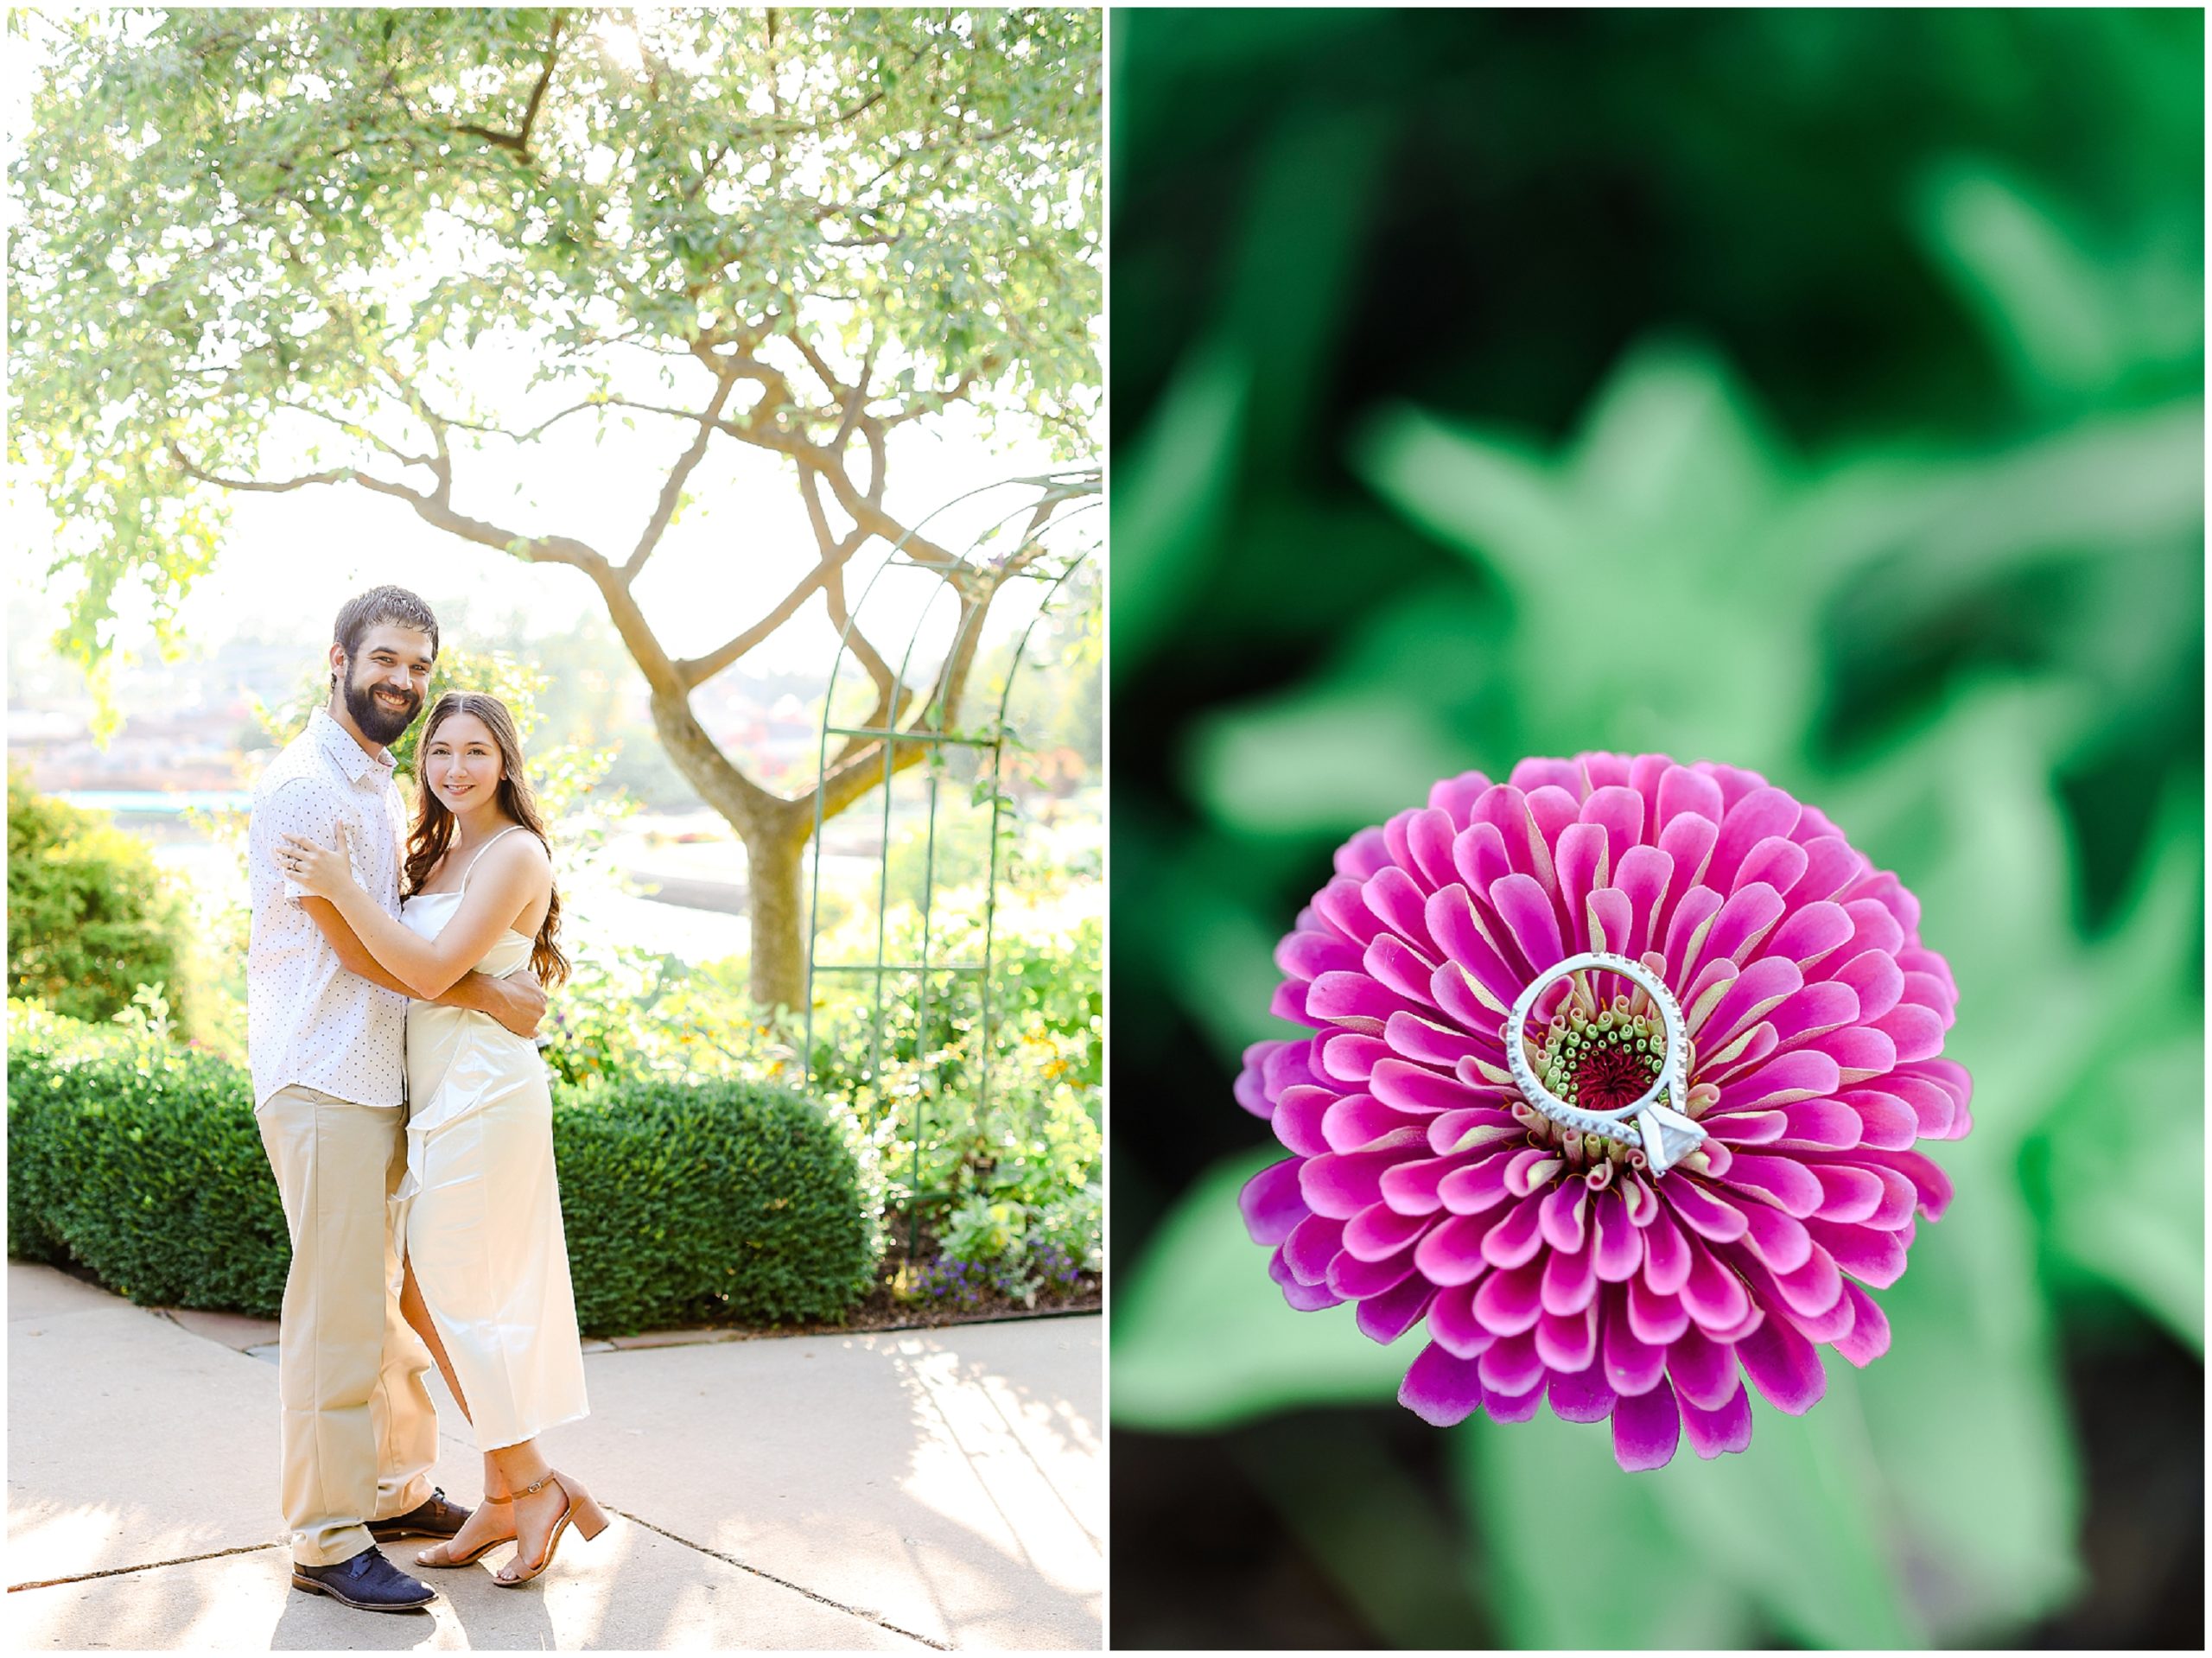 Take a look at this romantic summer engagement session at the Overland Park Arboretum! Family Photos Engagement Photos and Wedding Photos in Kansas City